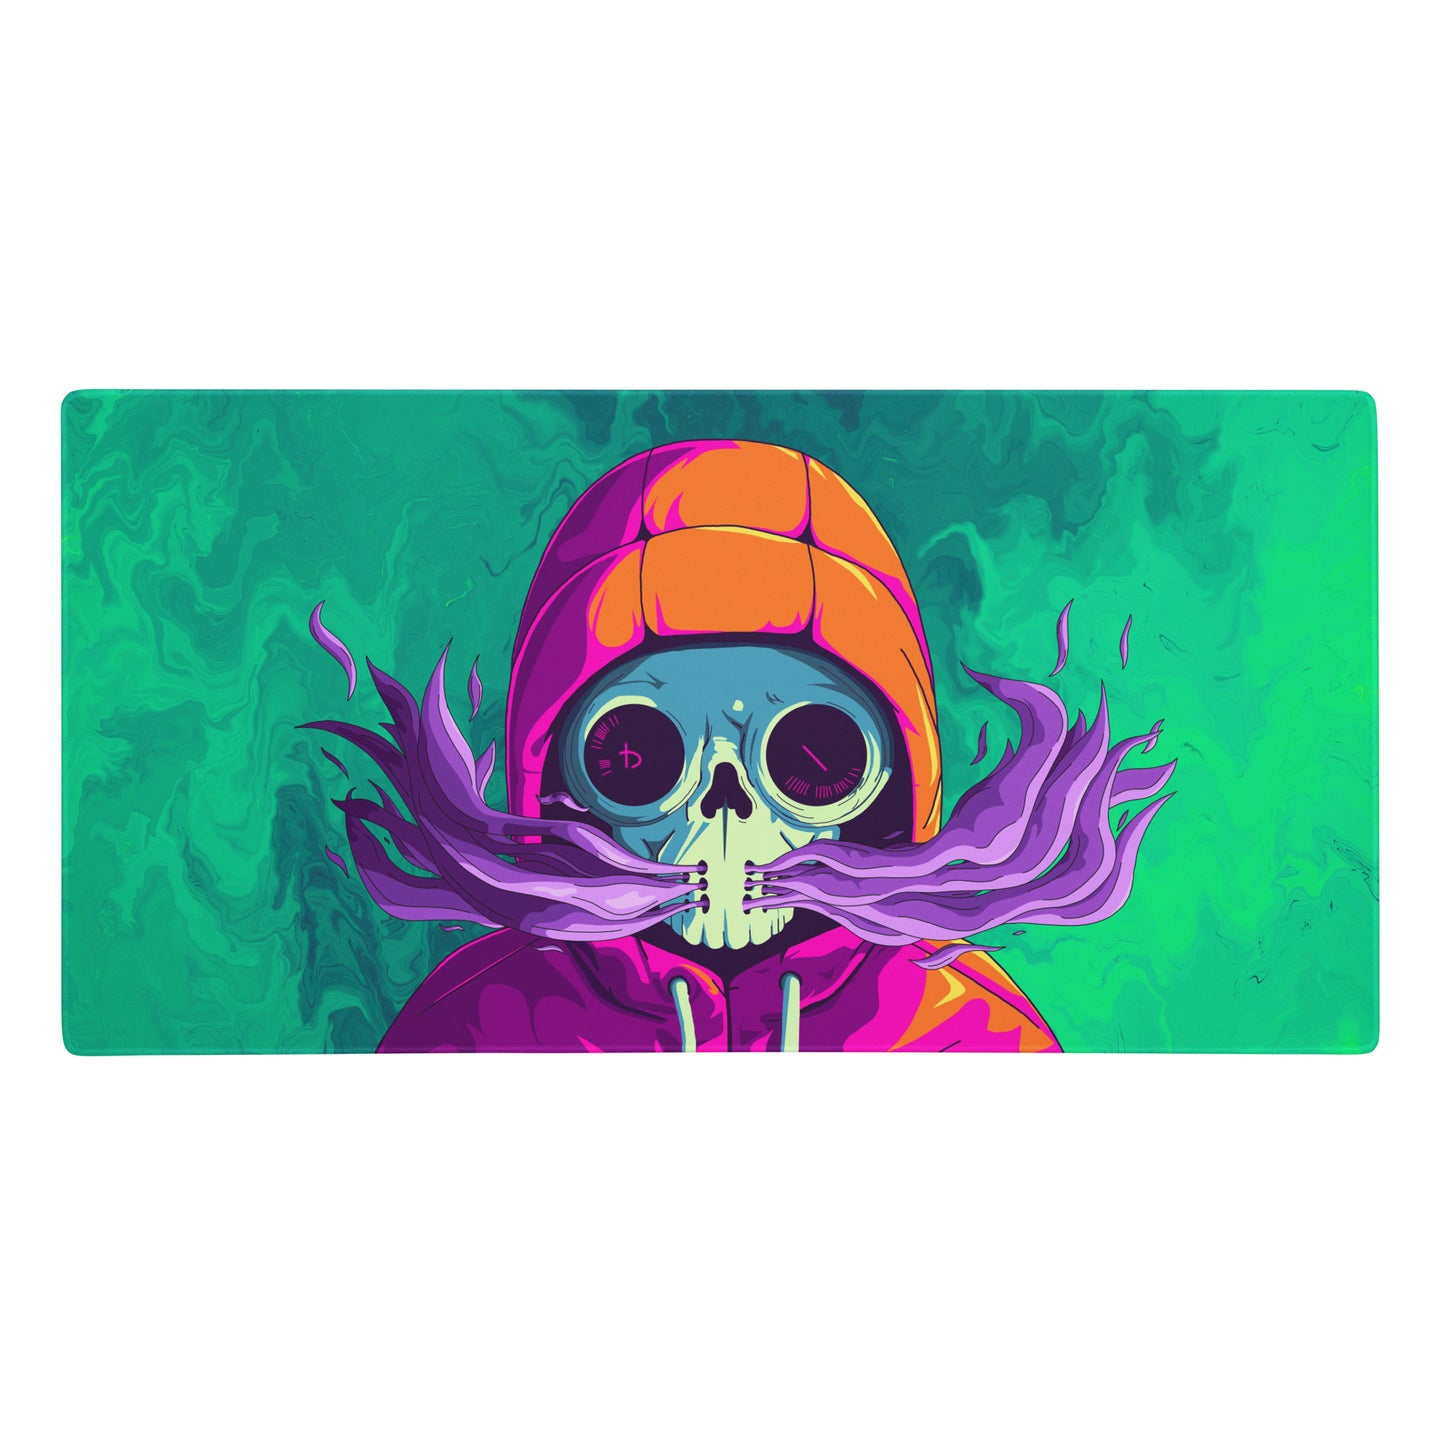 A 36" x 18" desk pad with a man wearing a skull gas mask breathing smoke out from it. Green in color.